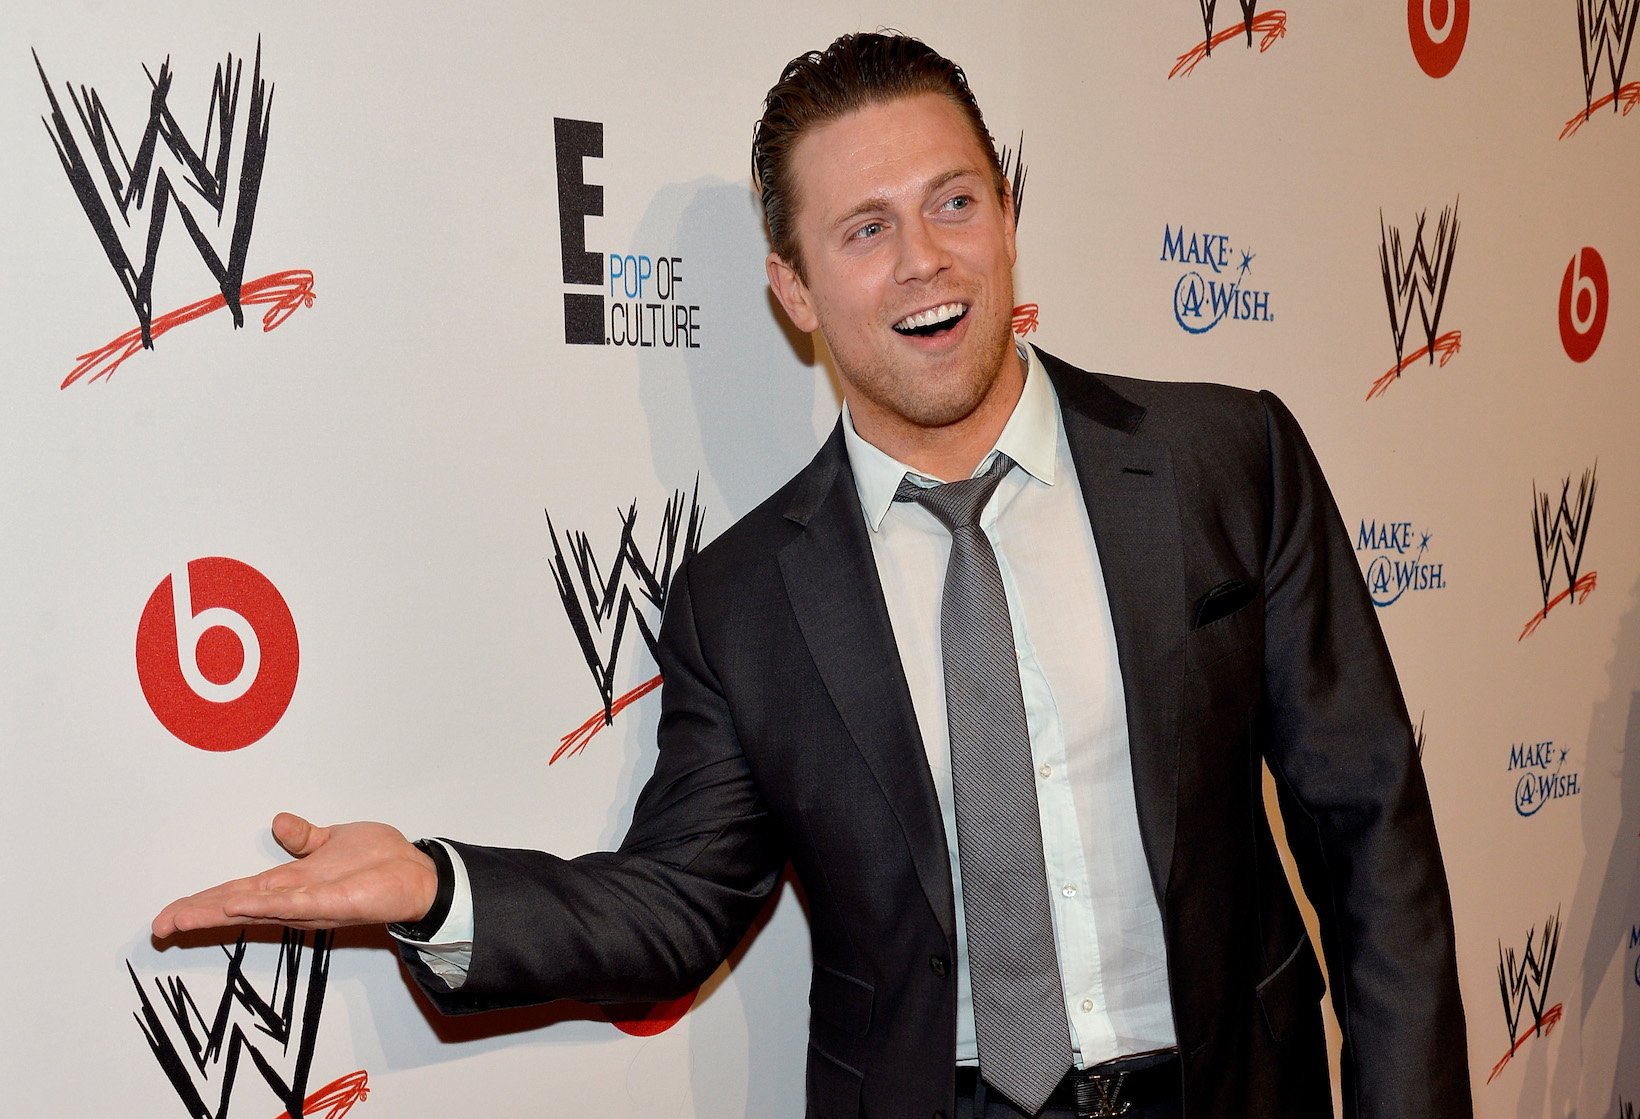 WWE star 'The Miz' from MTV's 'The Challenge' smiling with his mouth open at an event